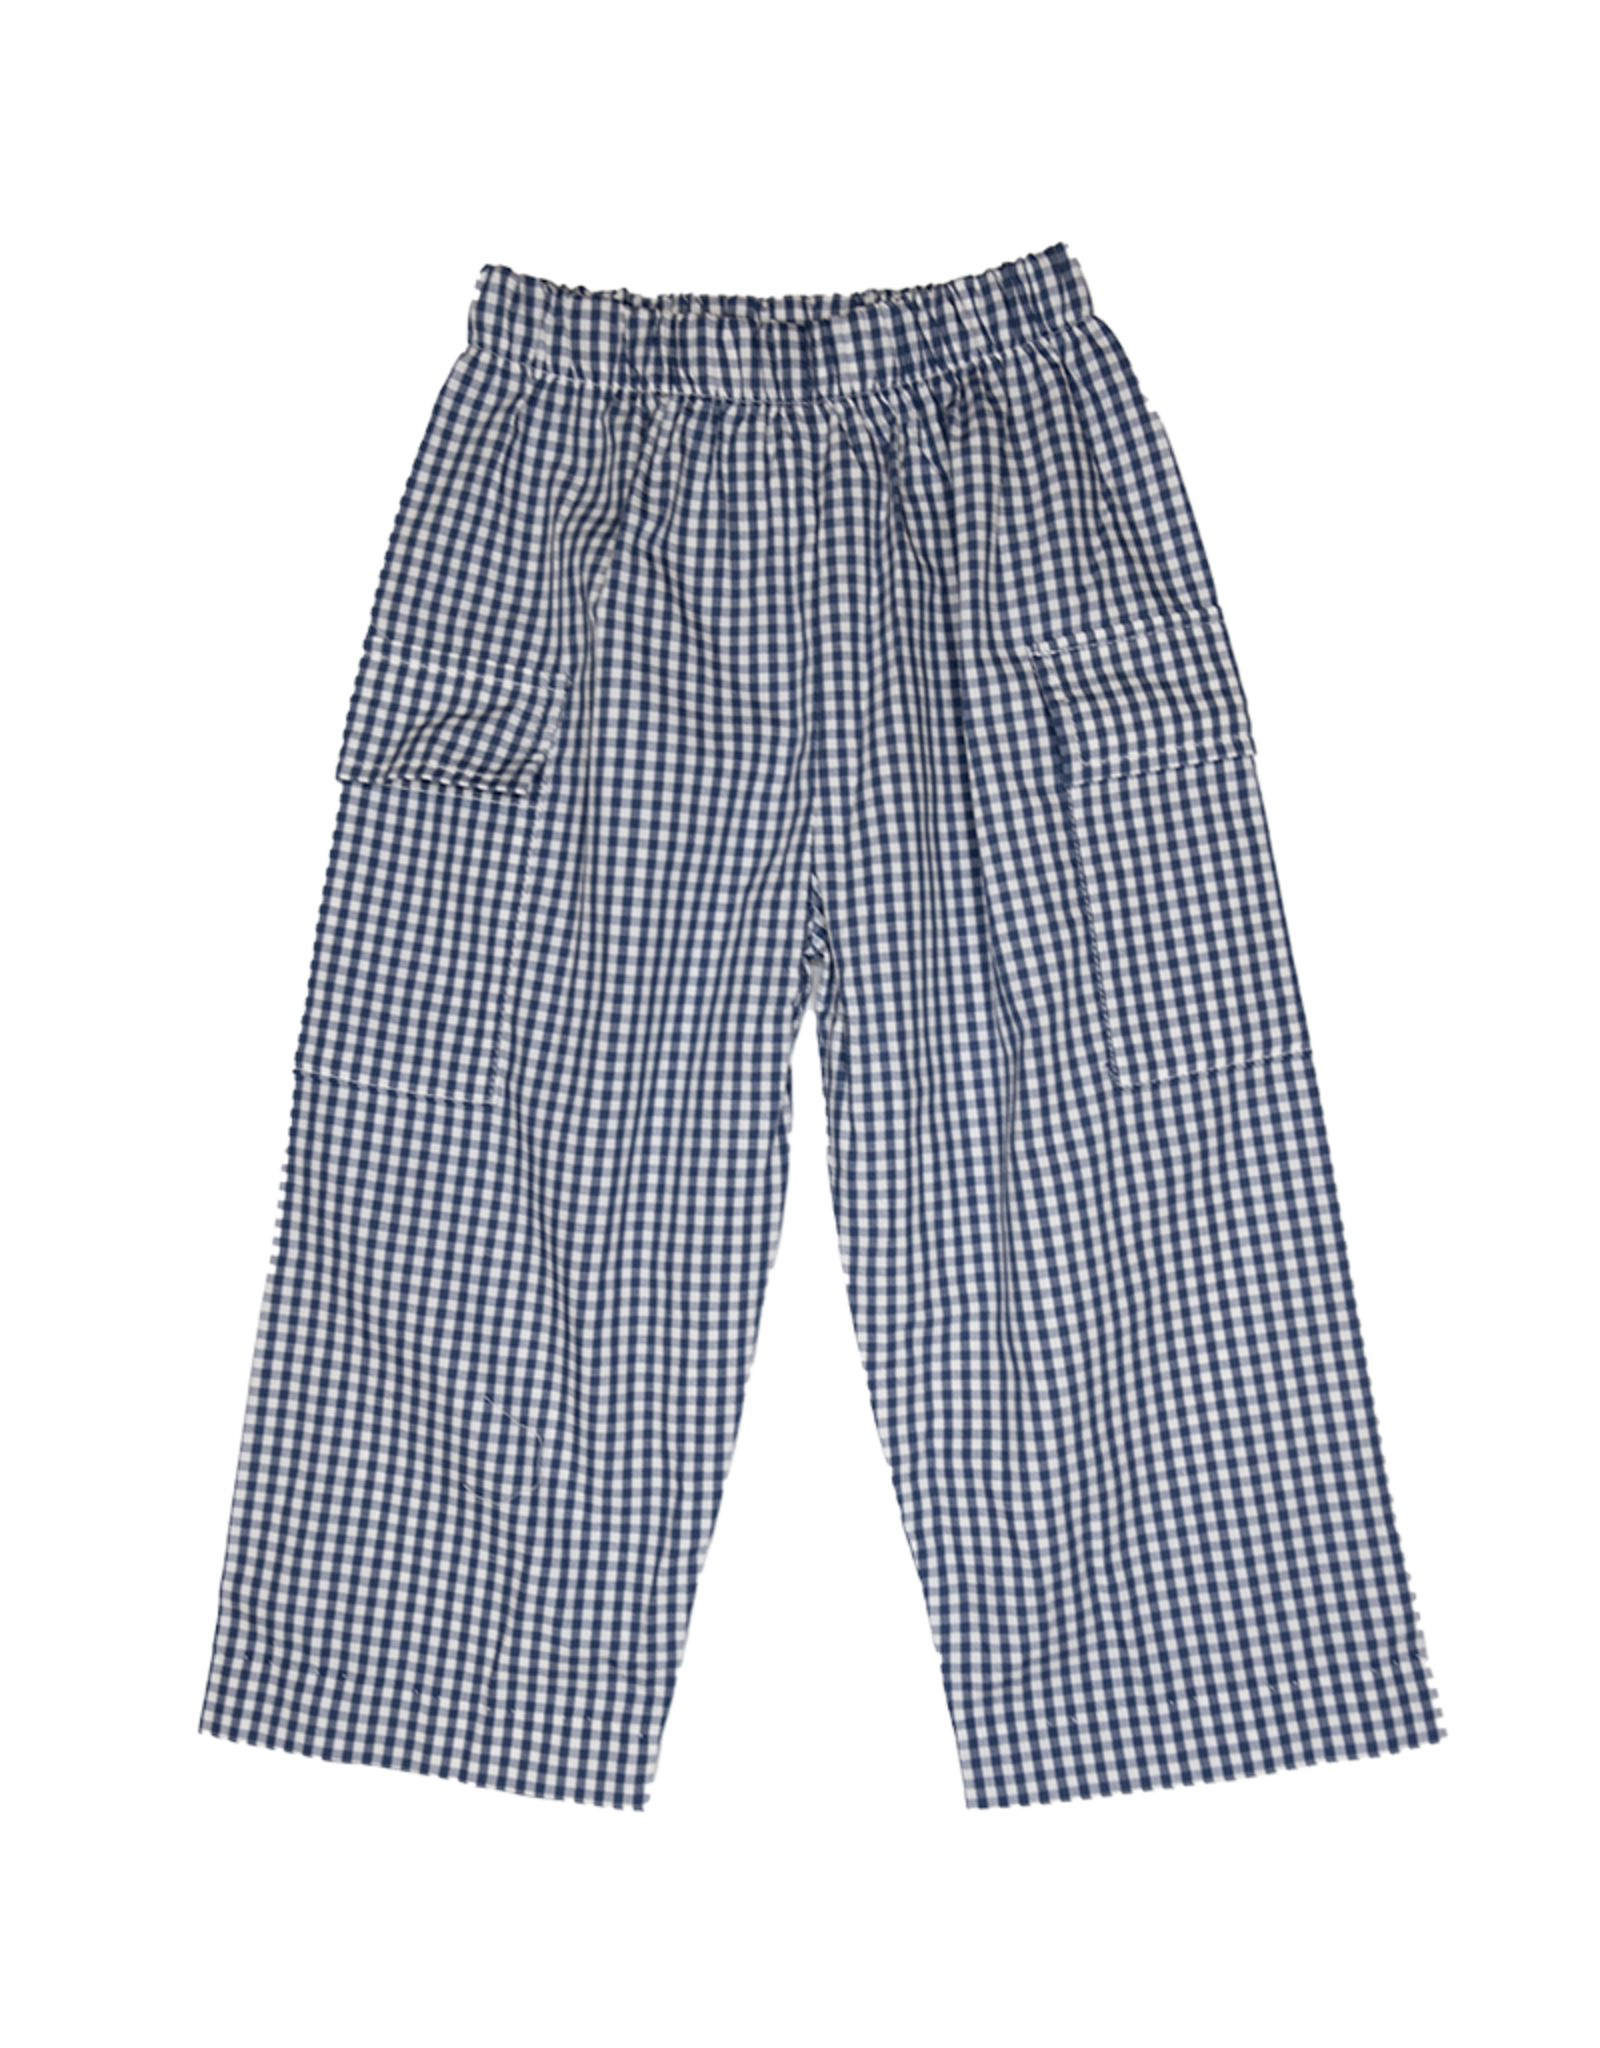 Millie Jay 569 Navy Check Pant